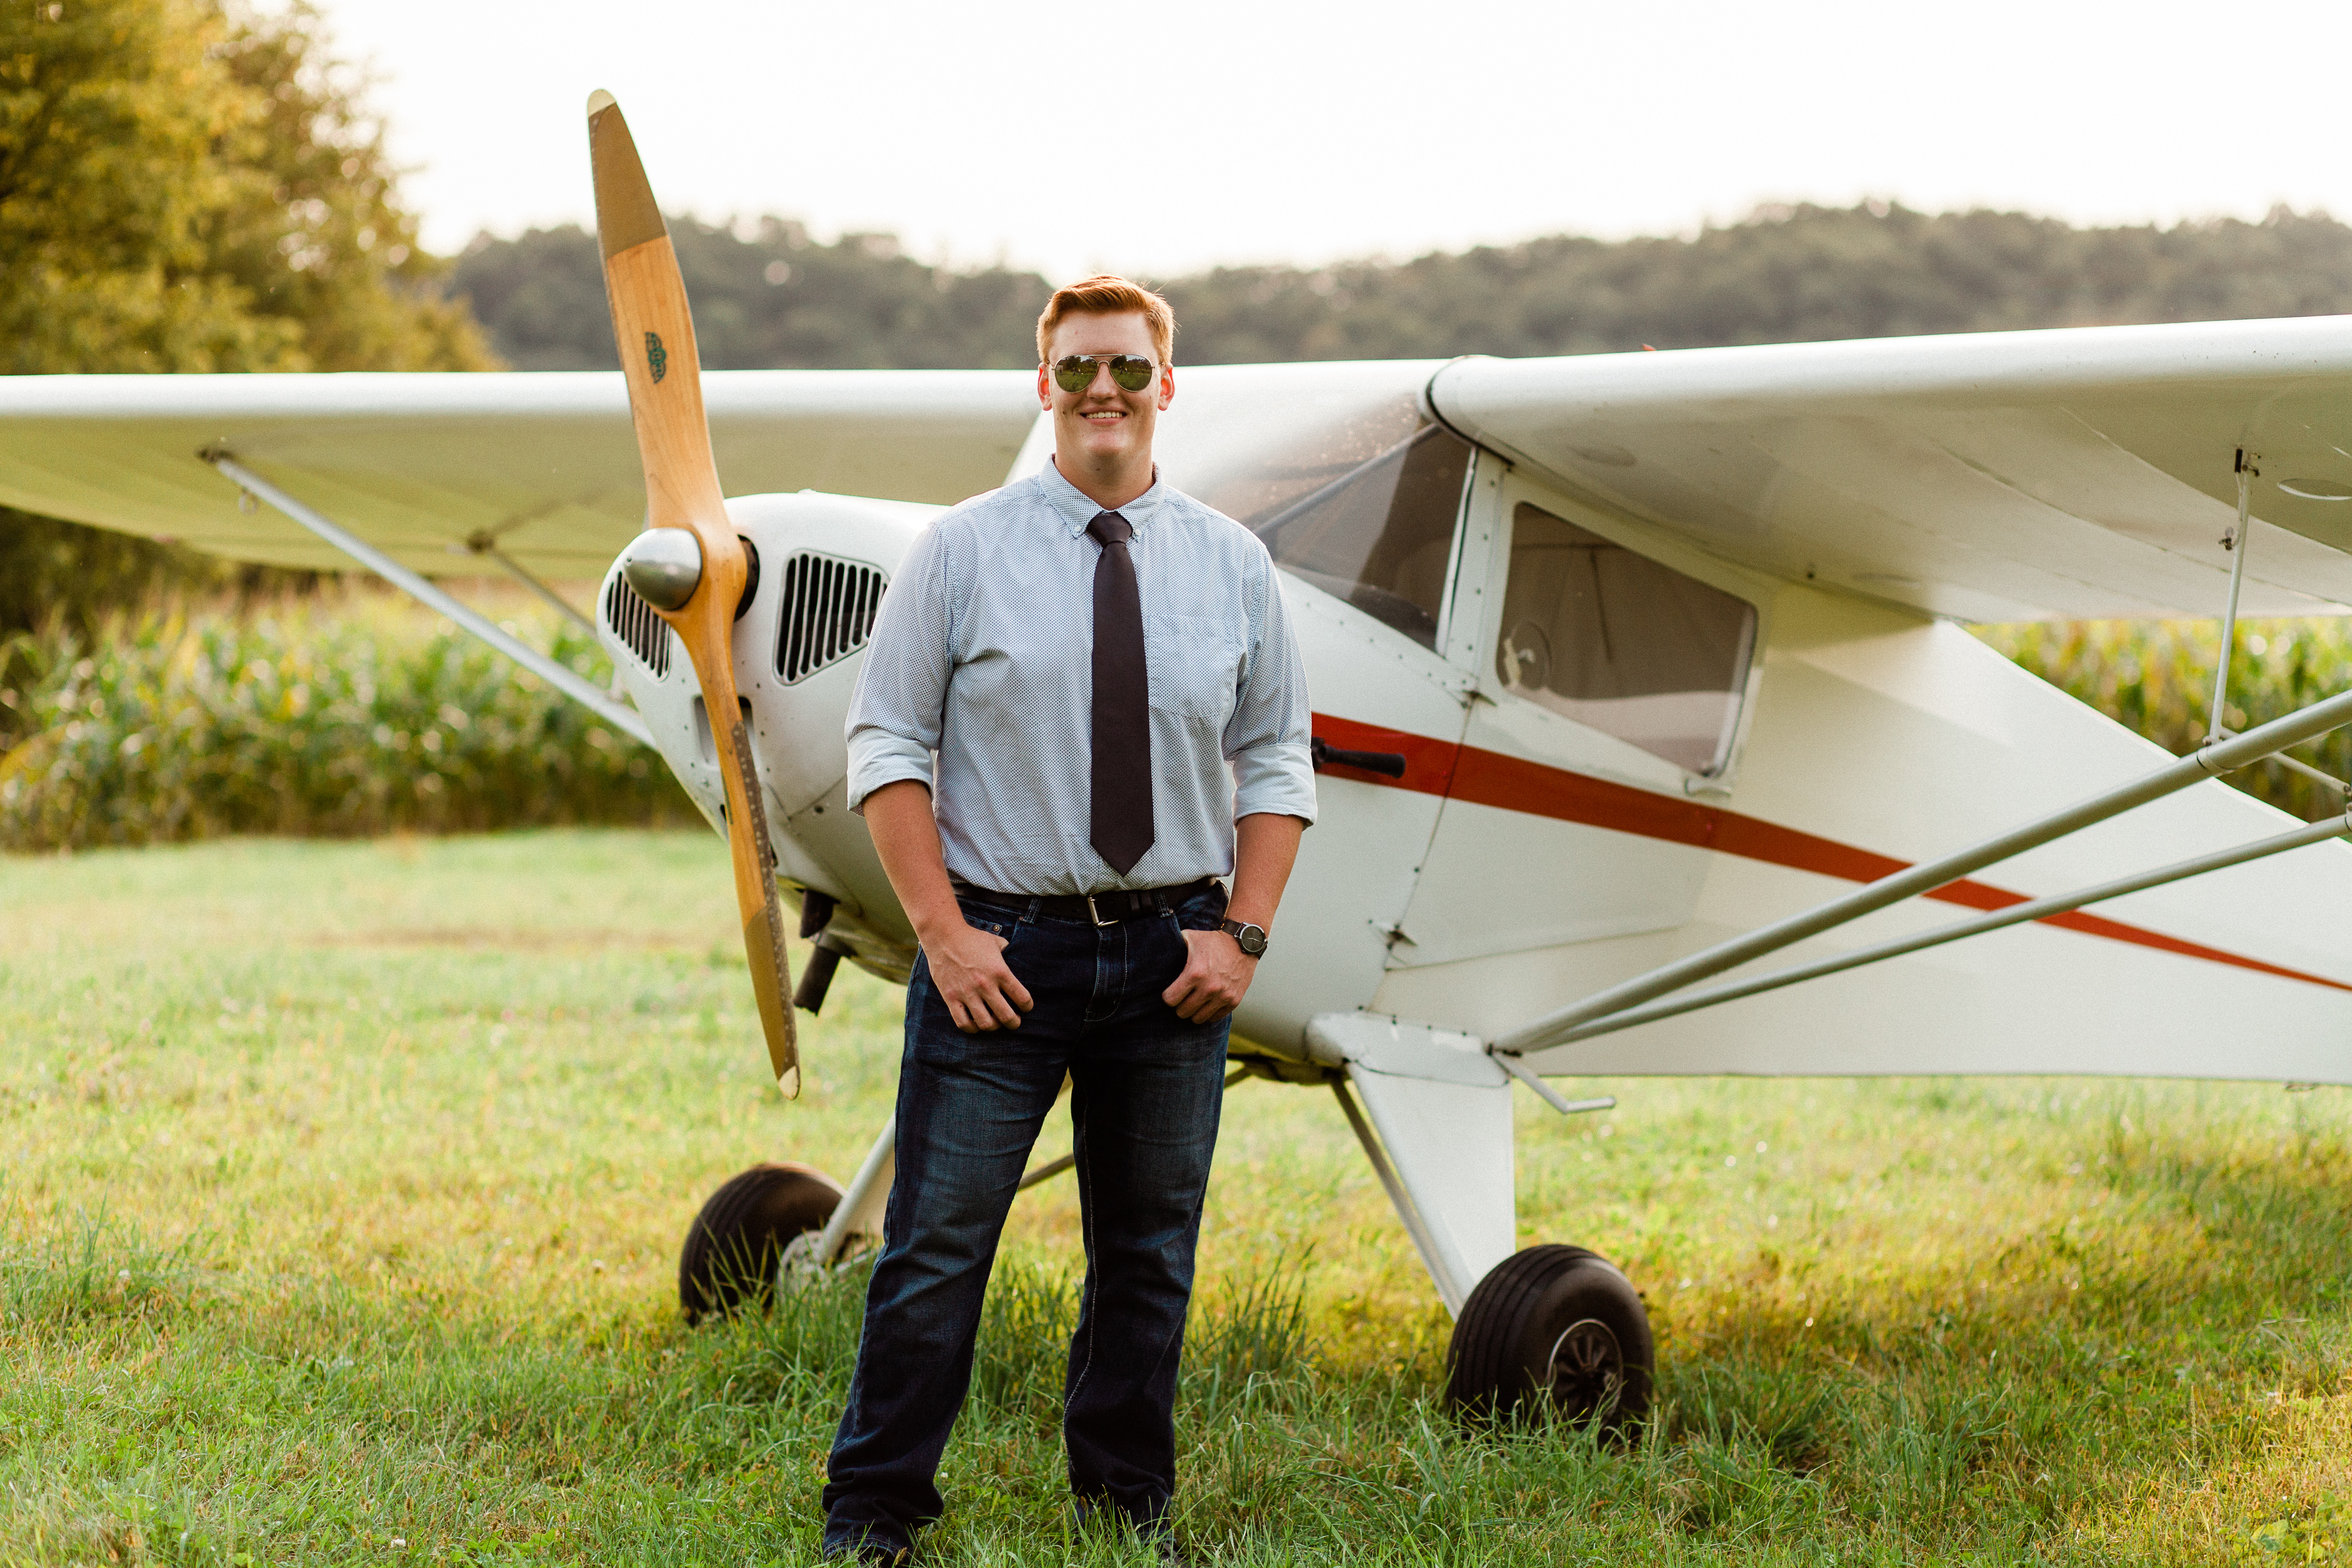 Philip Krzyszton, a white man with red hair, standing next to vintage plane in a green field with green trees. He is wearing aviator sunglasses, dark blue jeans help up with a belt, a light blue button up shirt, and a brown tie.